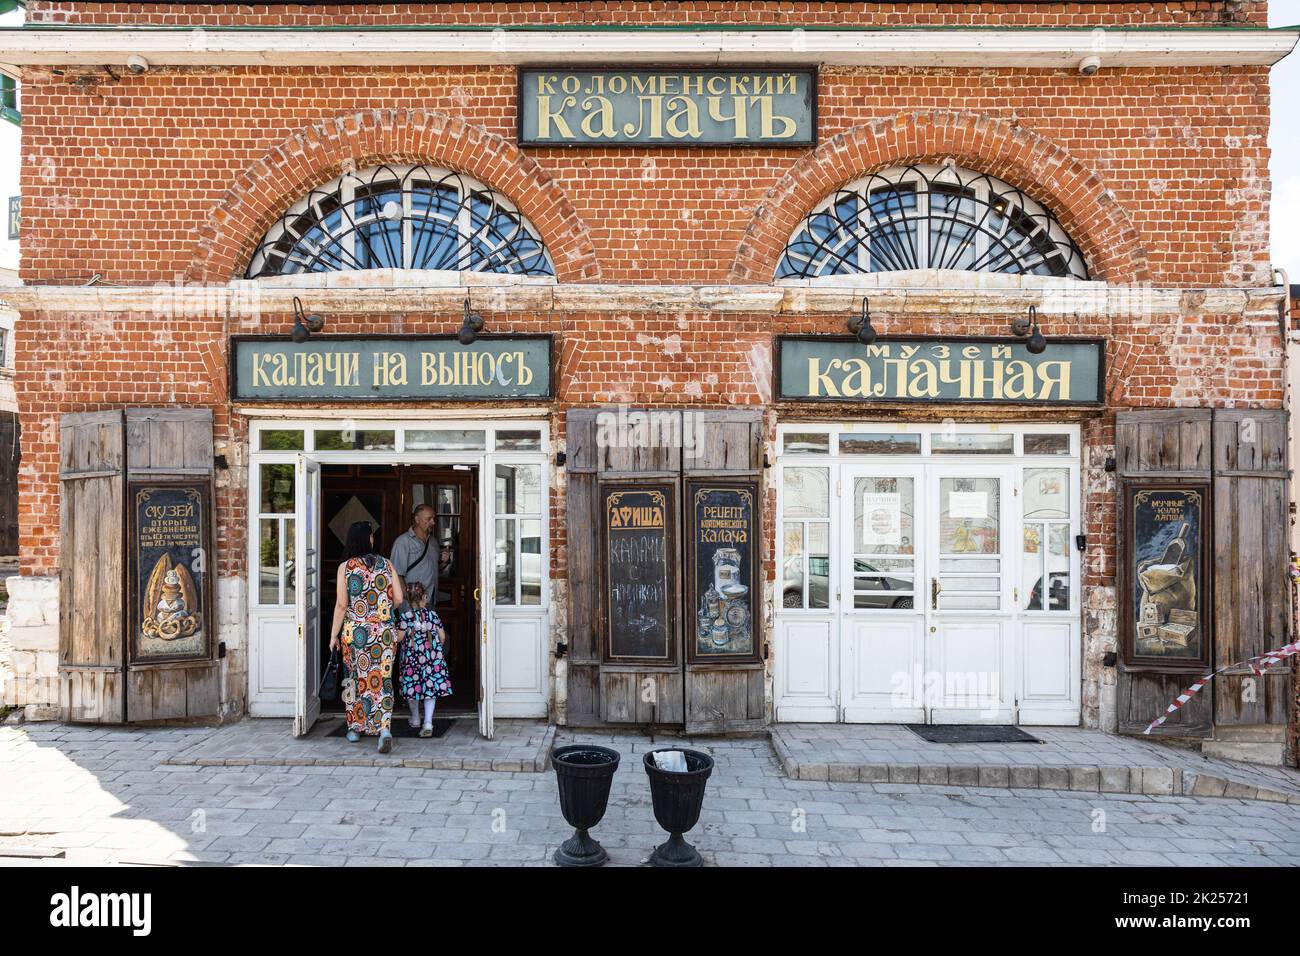 Kolomna, Russia - June 10, 2022: front view of Kalachnaya bakery museum of Kolomna kalach in Posad district of Old Kolomna city in summer day Stock Photo